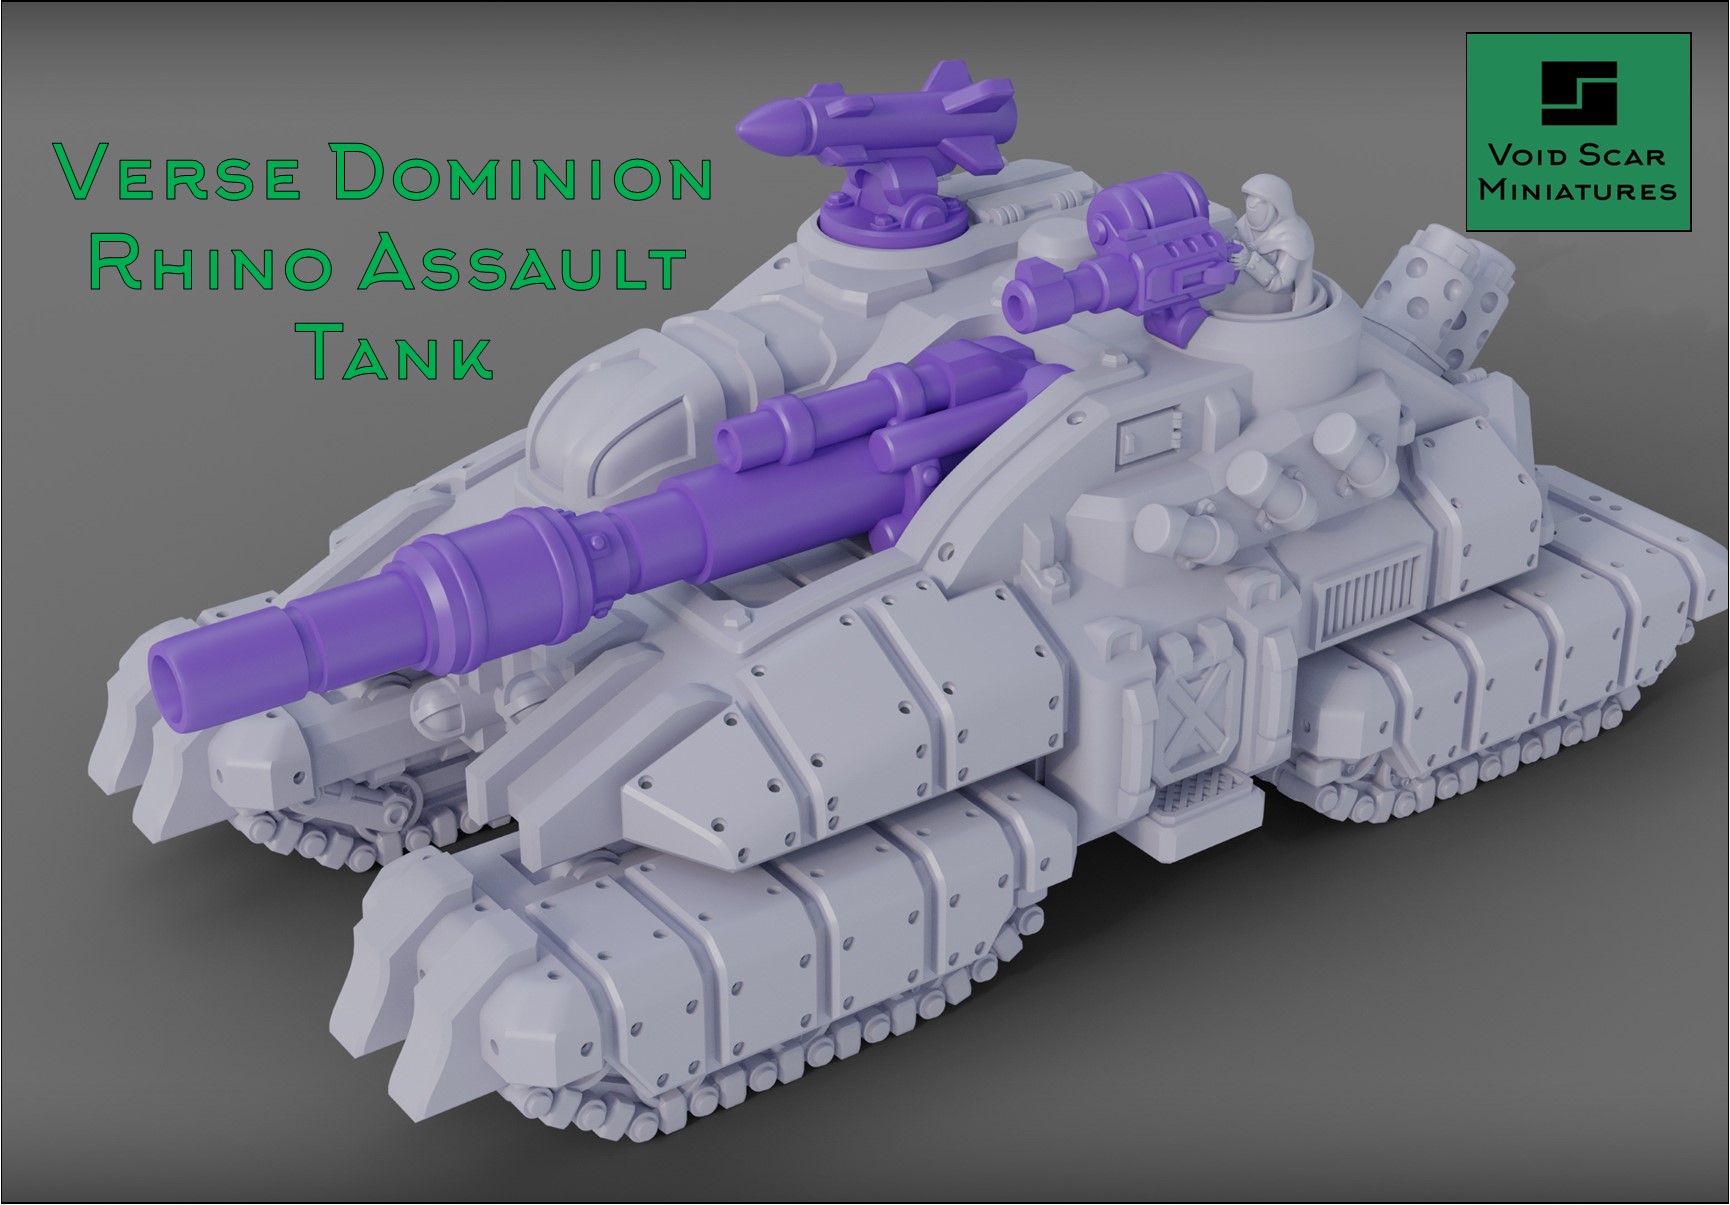 Verse Dominion vehicle previews